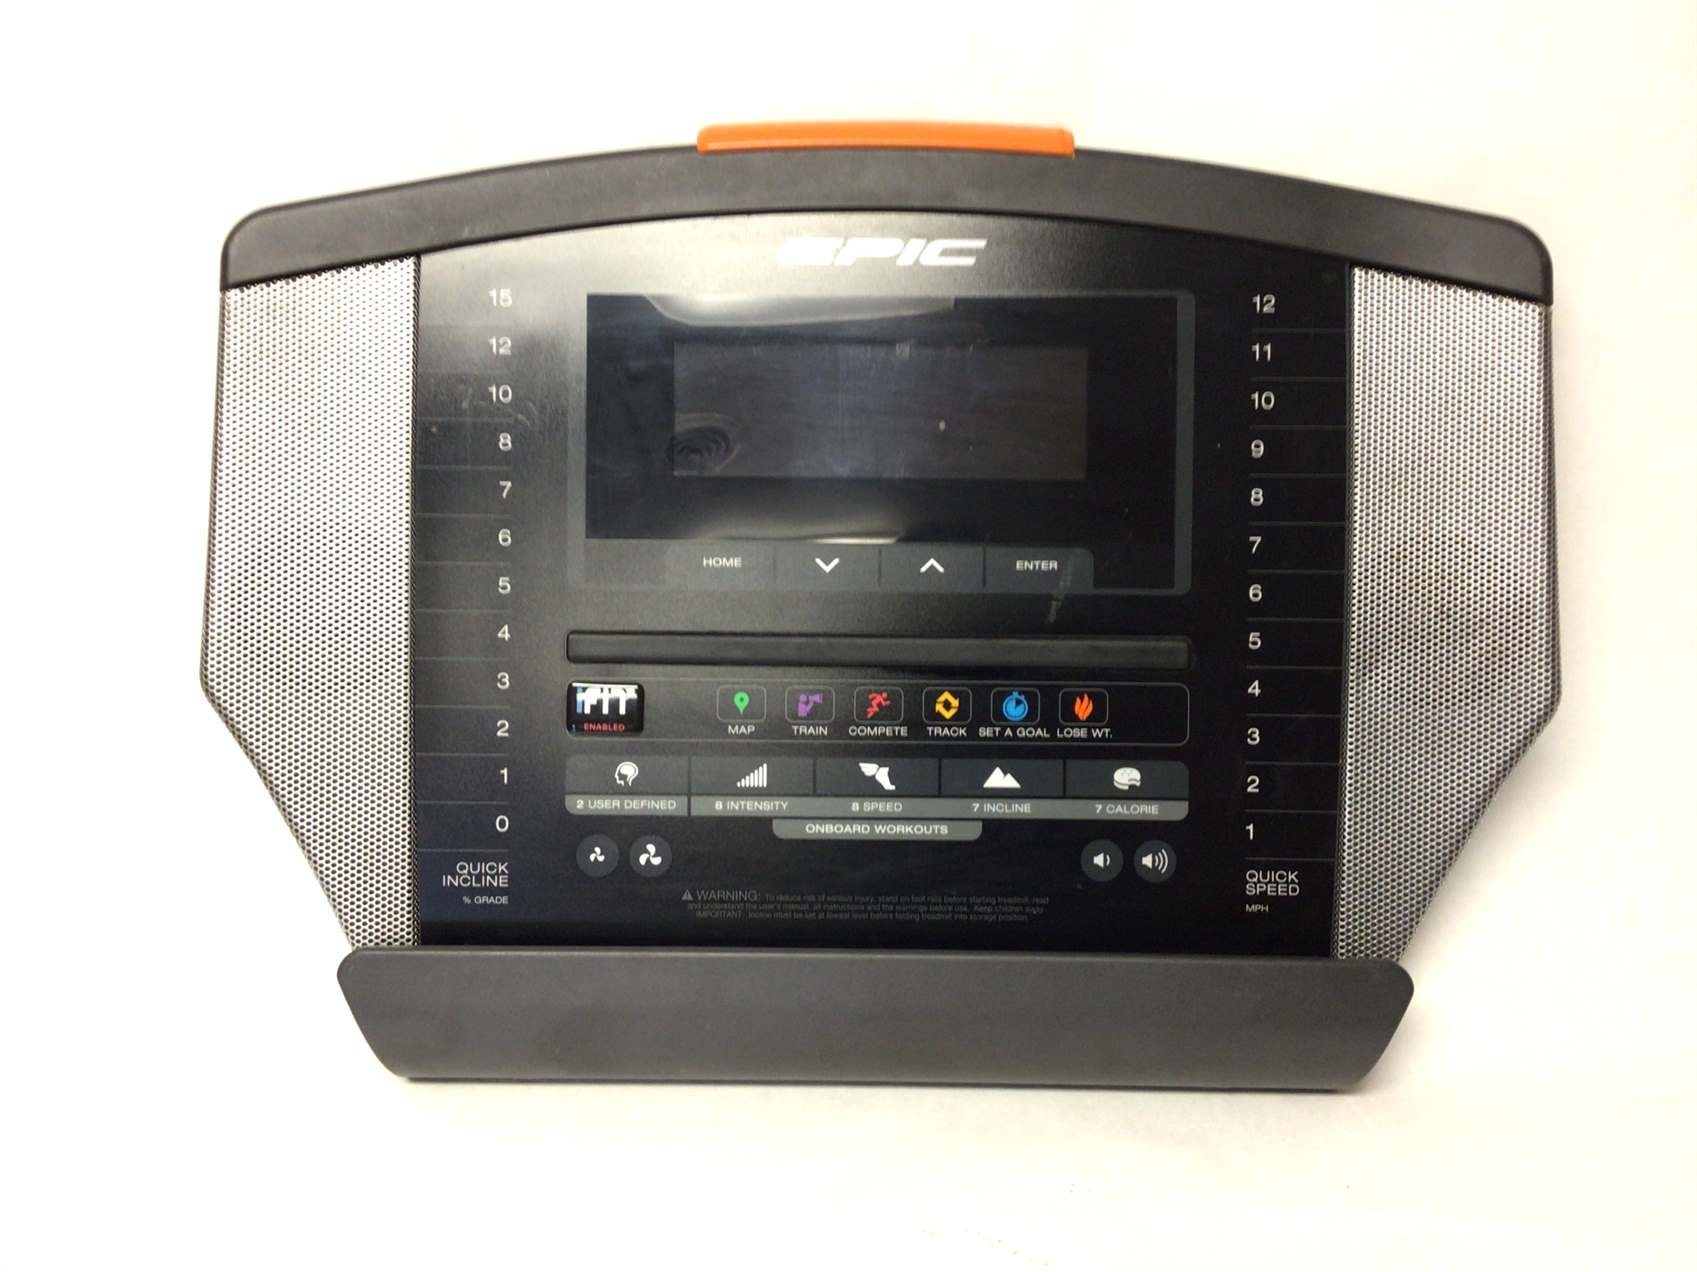 Display Console ETEP14112V1 - Used Only